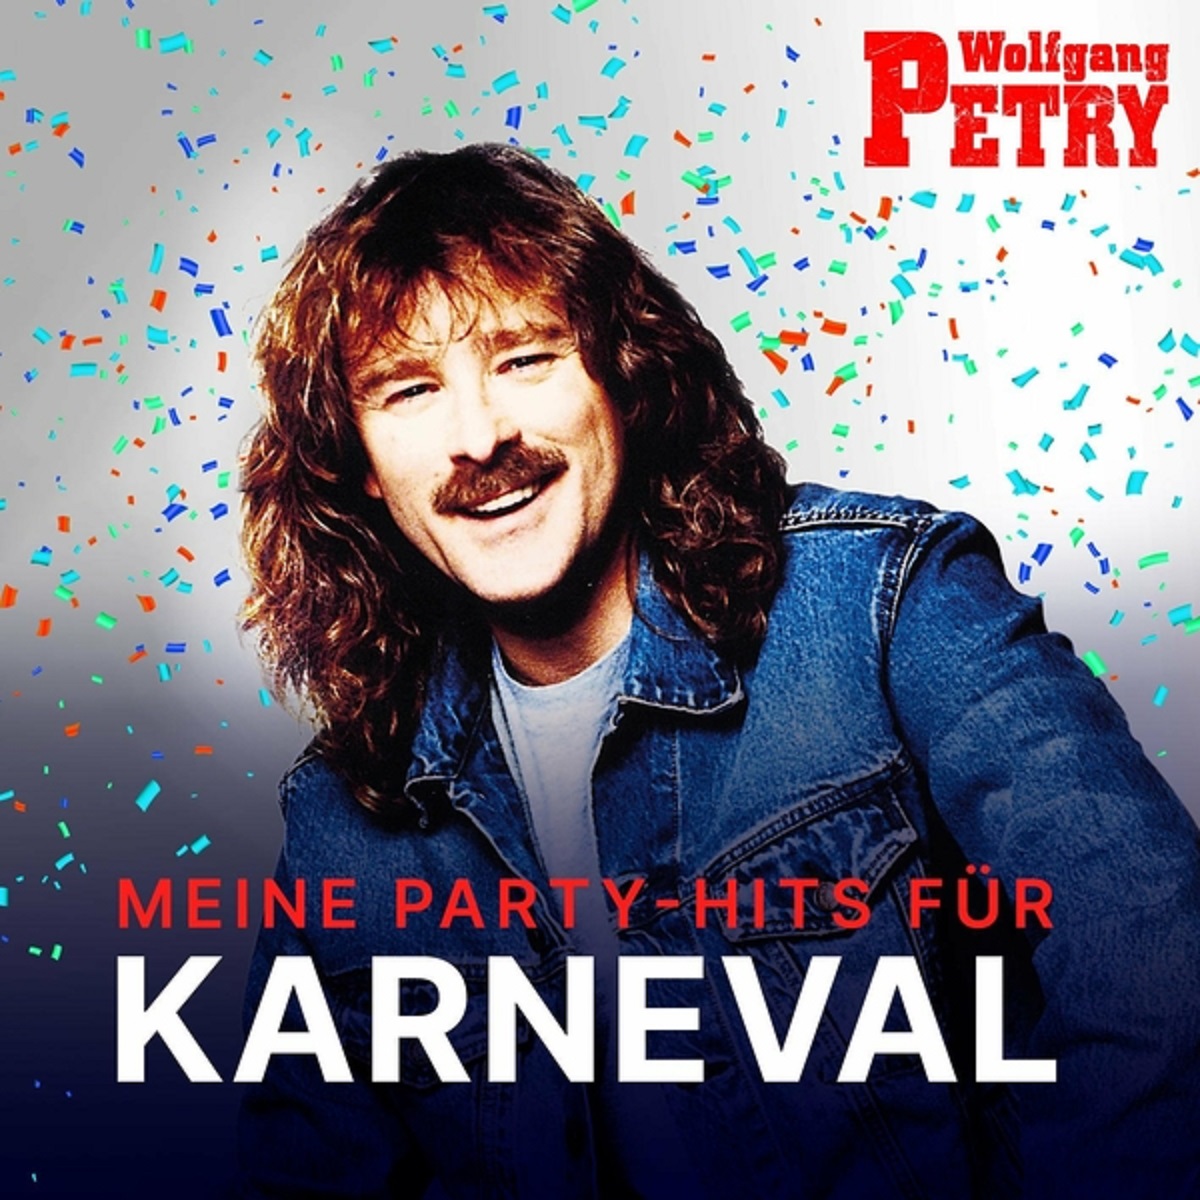 Wolfgang Petry - Meine Party-Hits für Karneval (Collection) (2022) 